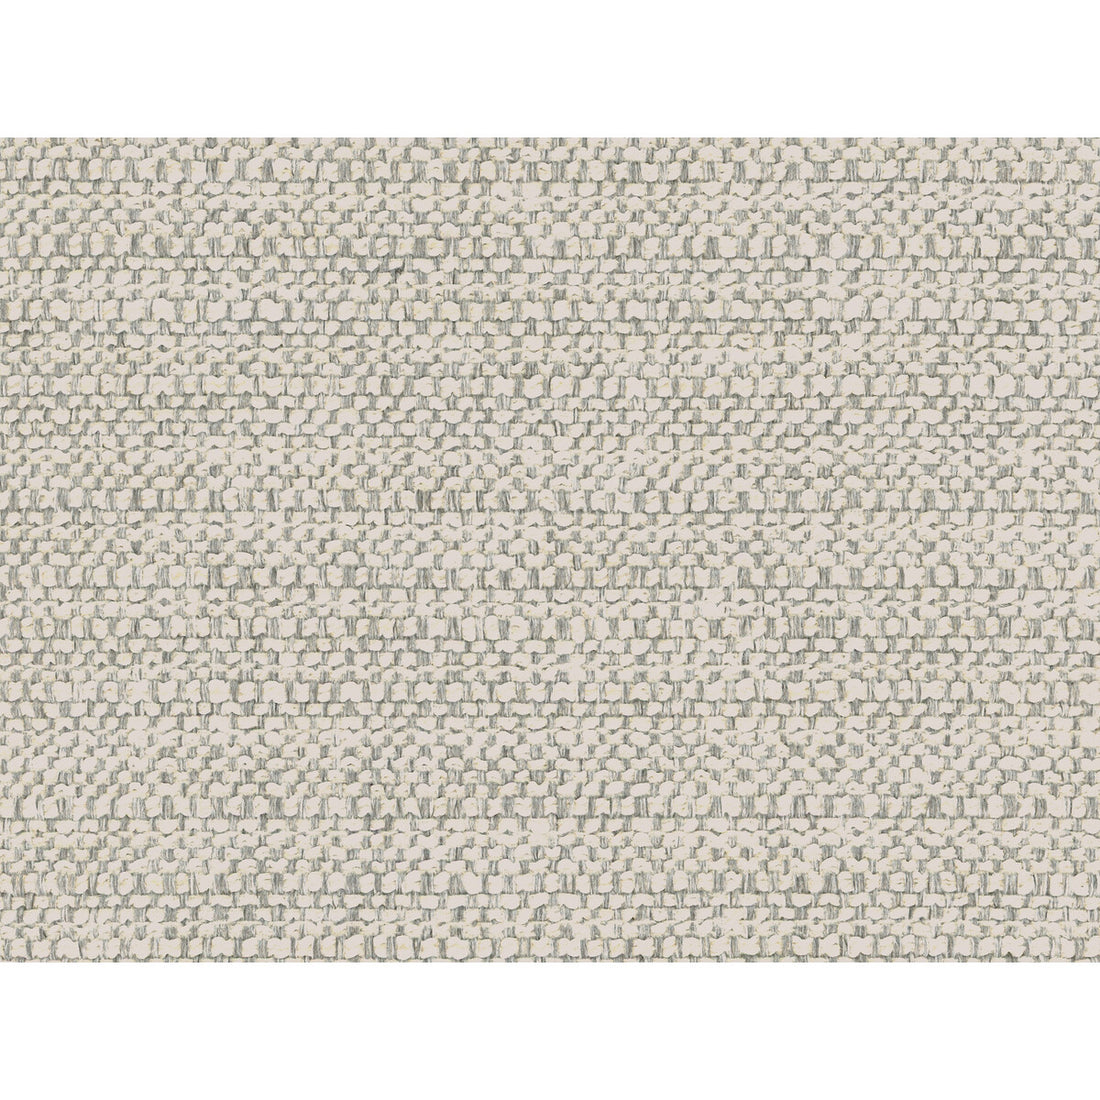 Andesite fabric in alloy color - pattern 34593.11.0 - by Kravet Couture in the Calvin Klein Home collection